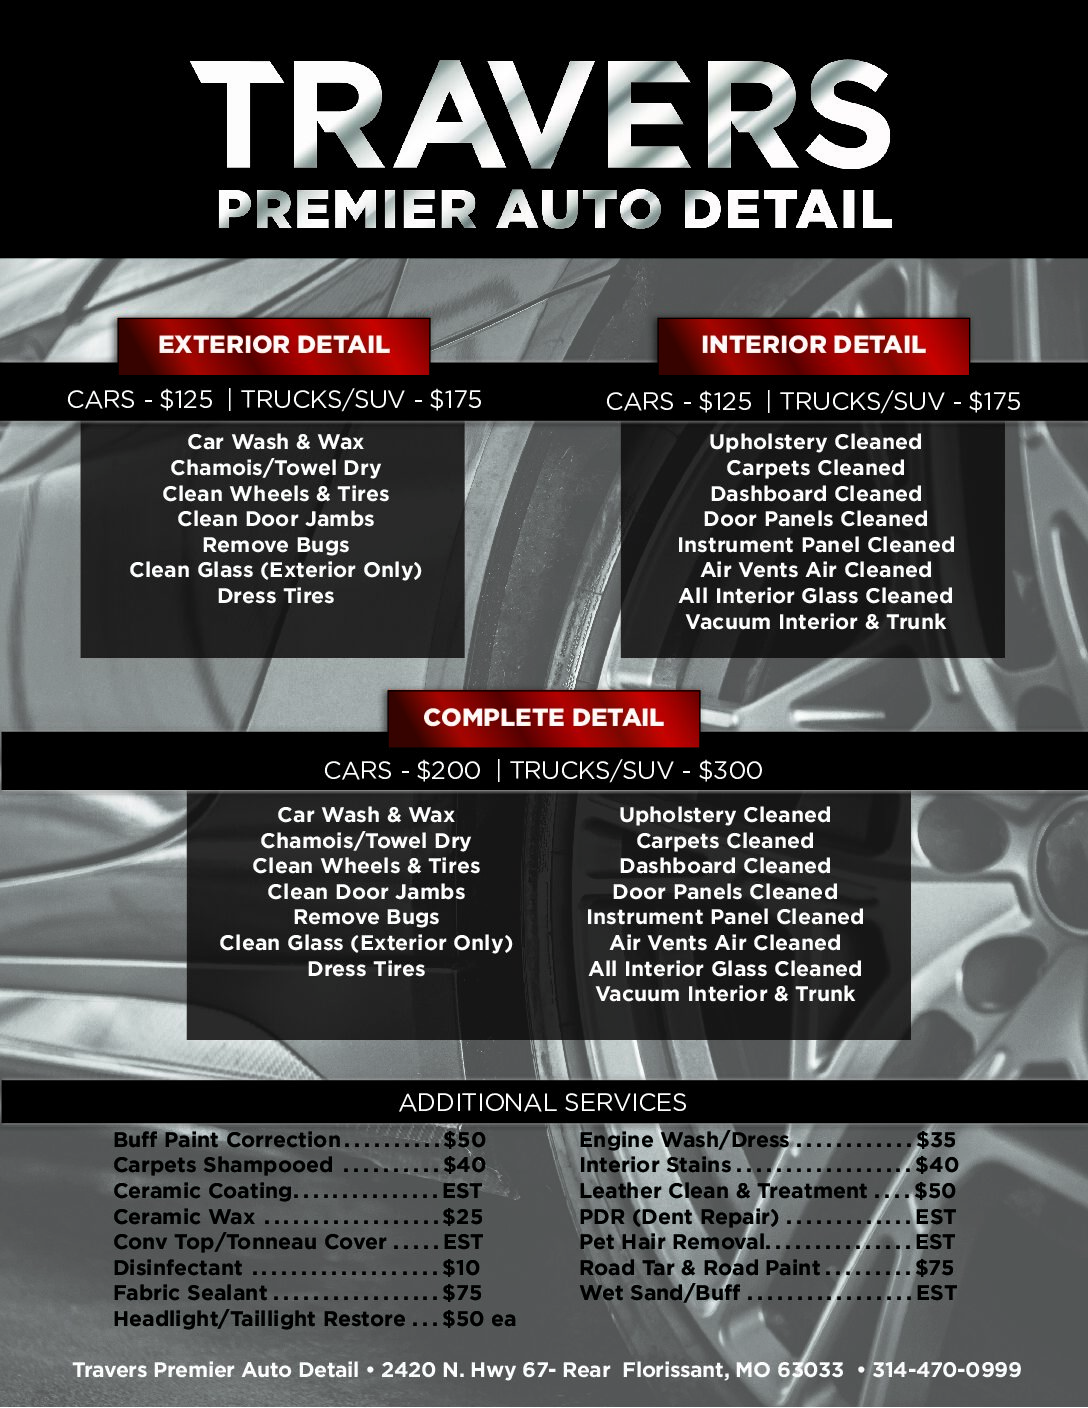 Auto Detailing Package Services